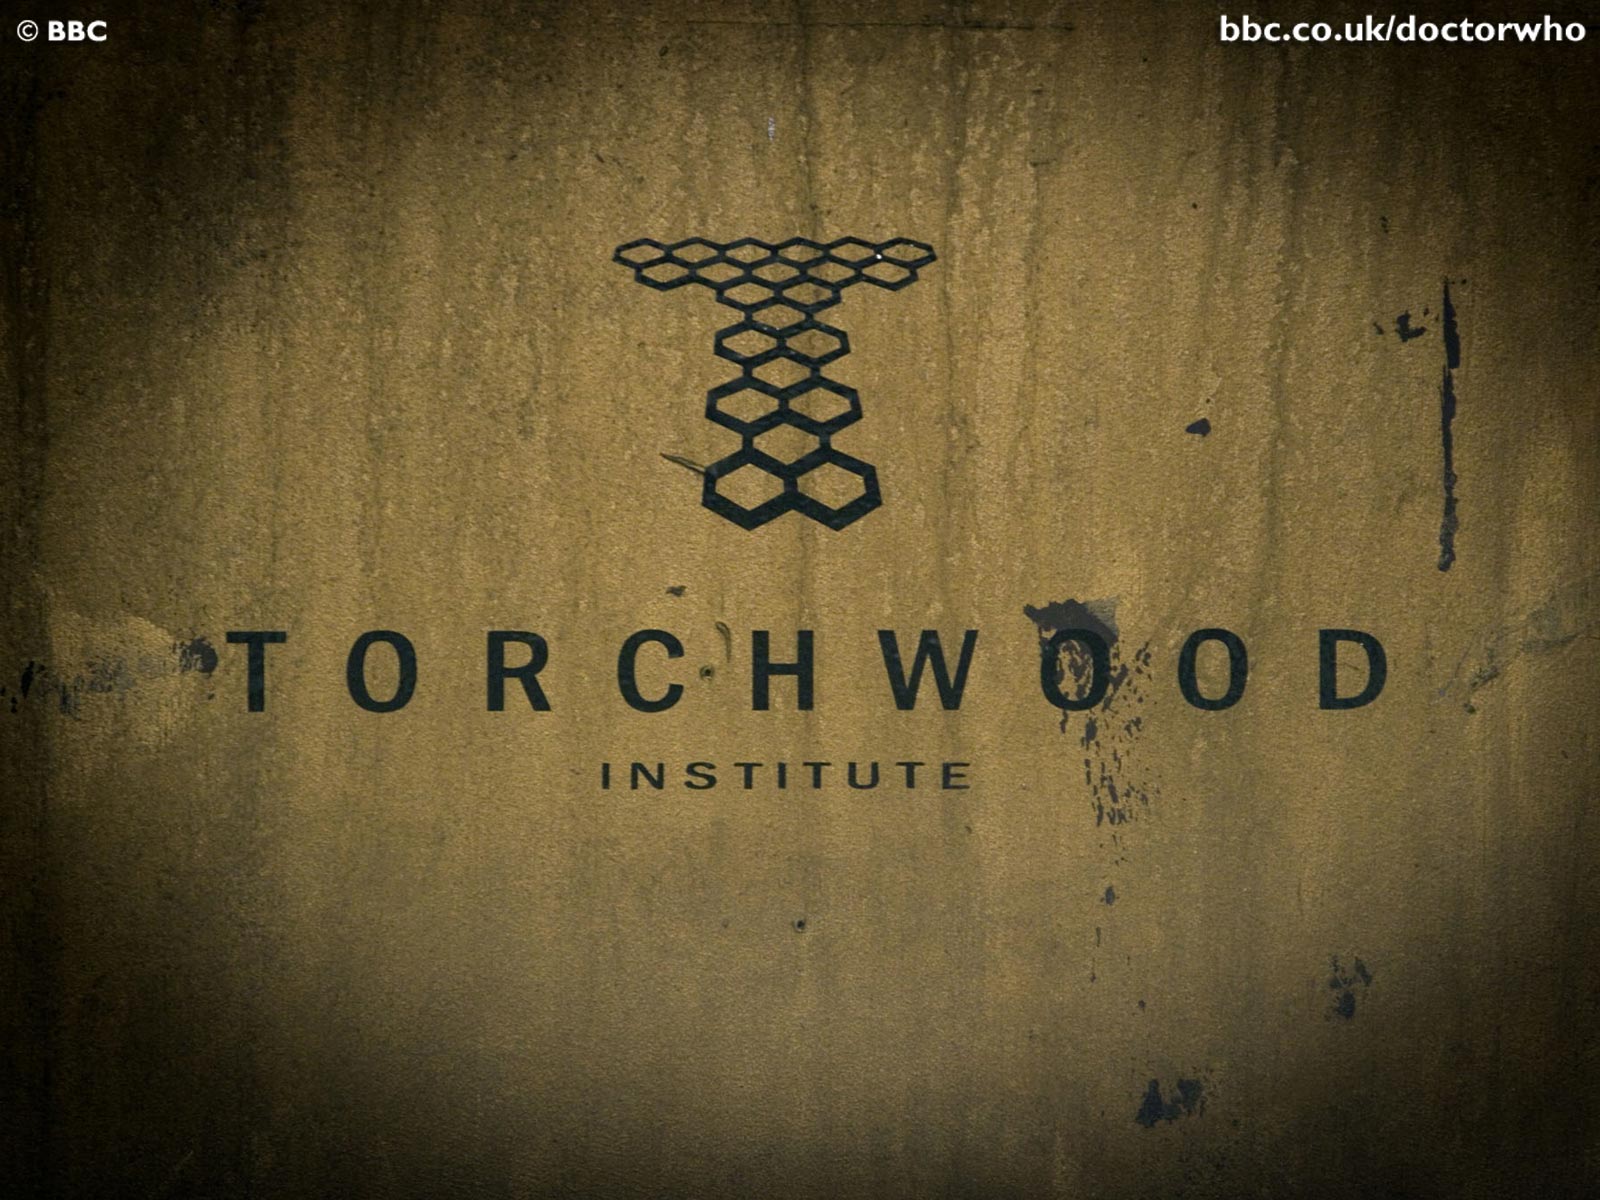 doctor who, torchwood, tv show phone background